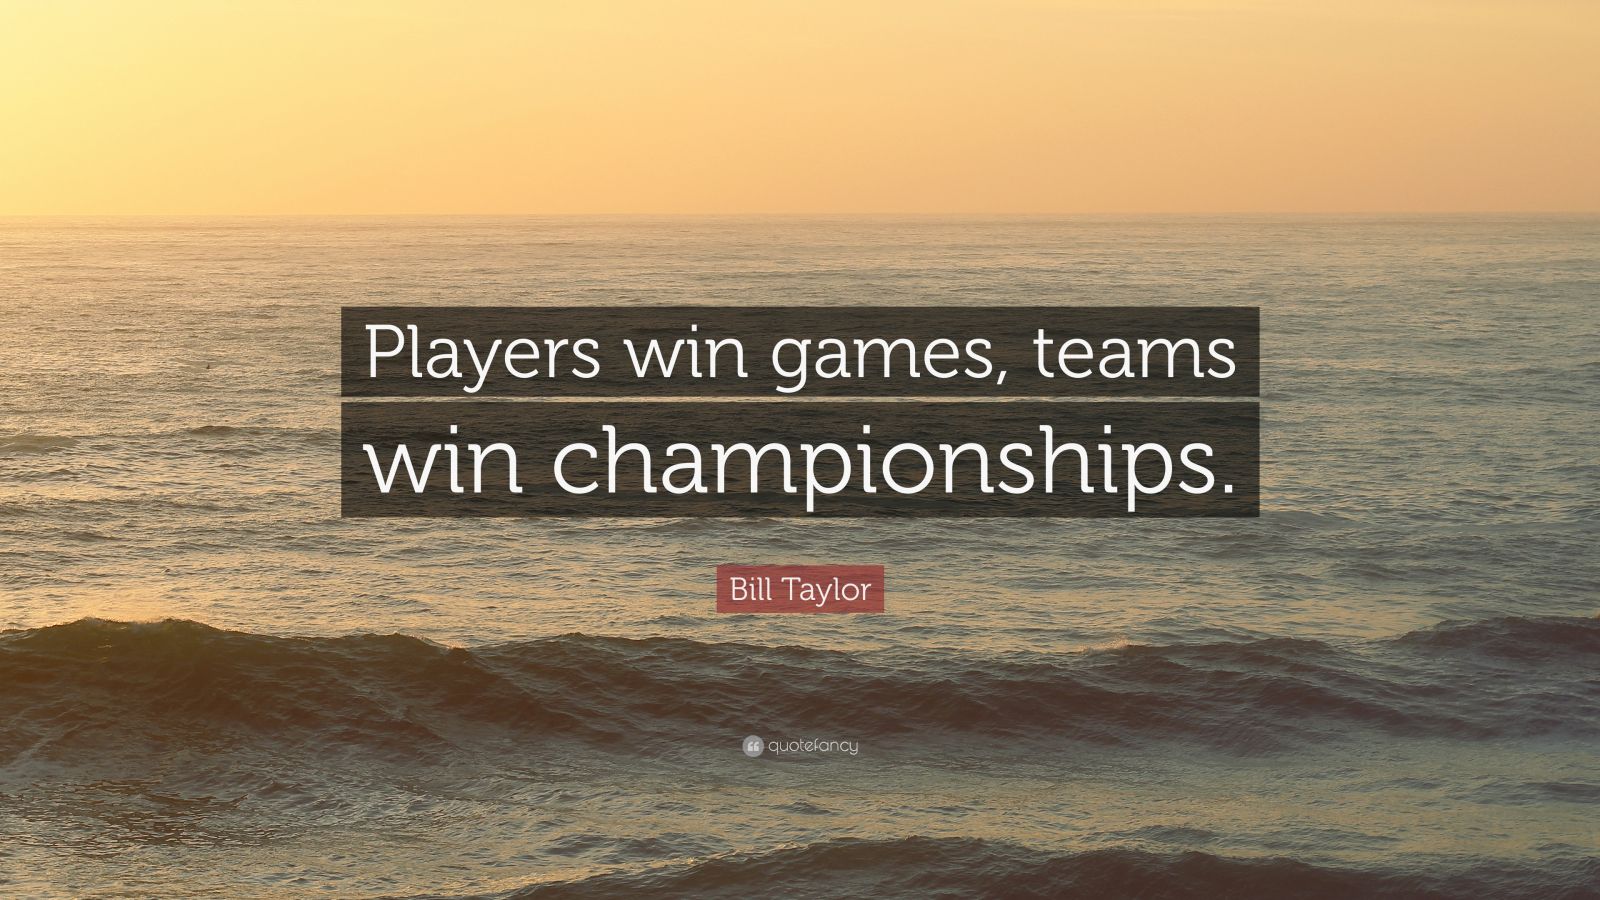 Bill Taylor Quote “Players win games, teams win championships.” (7